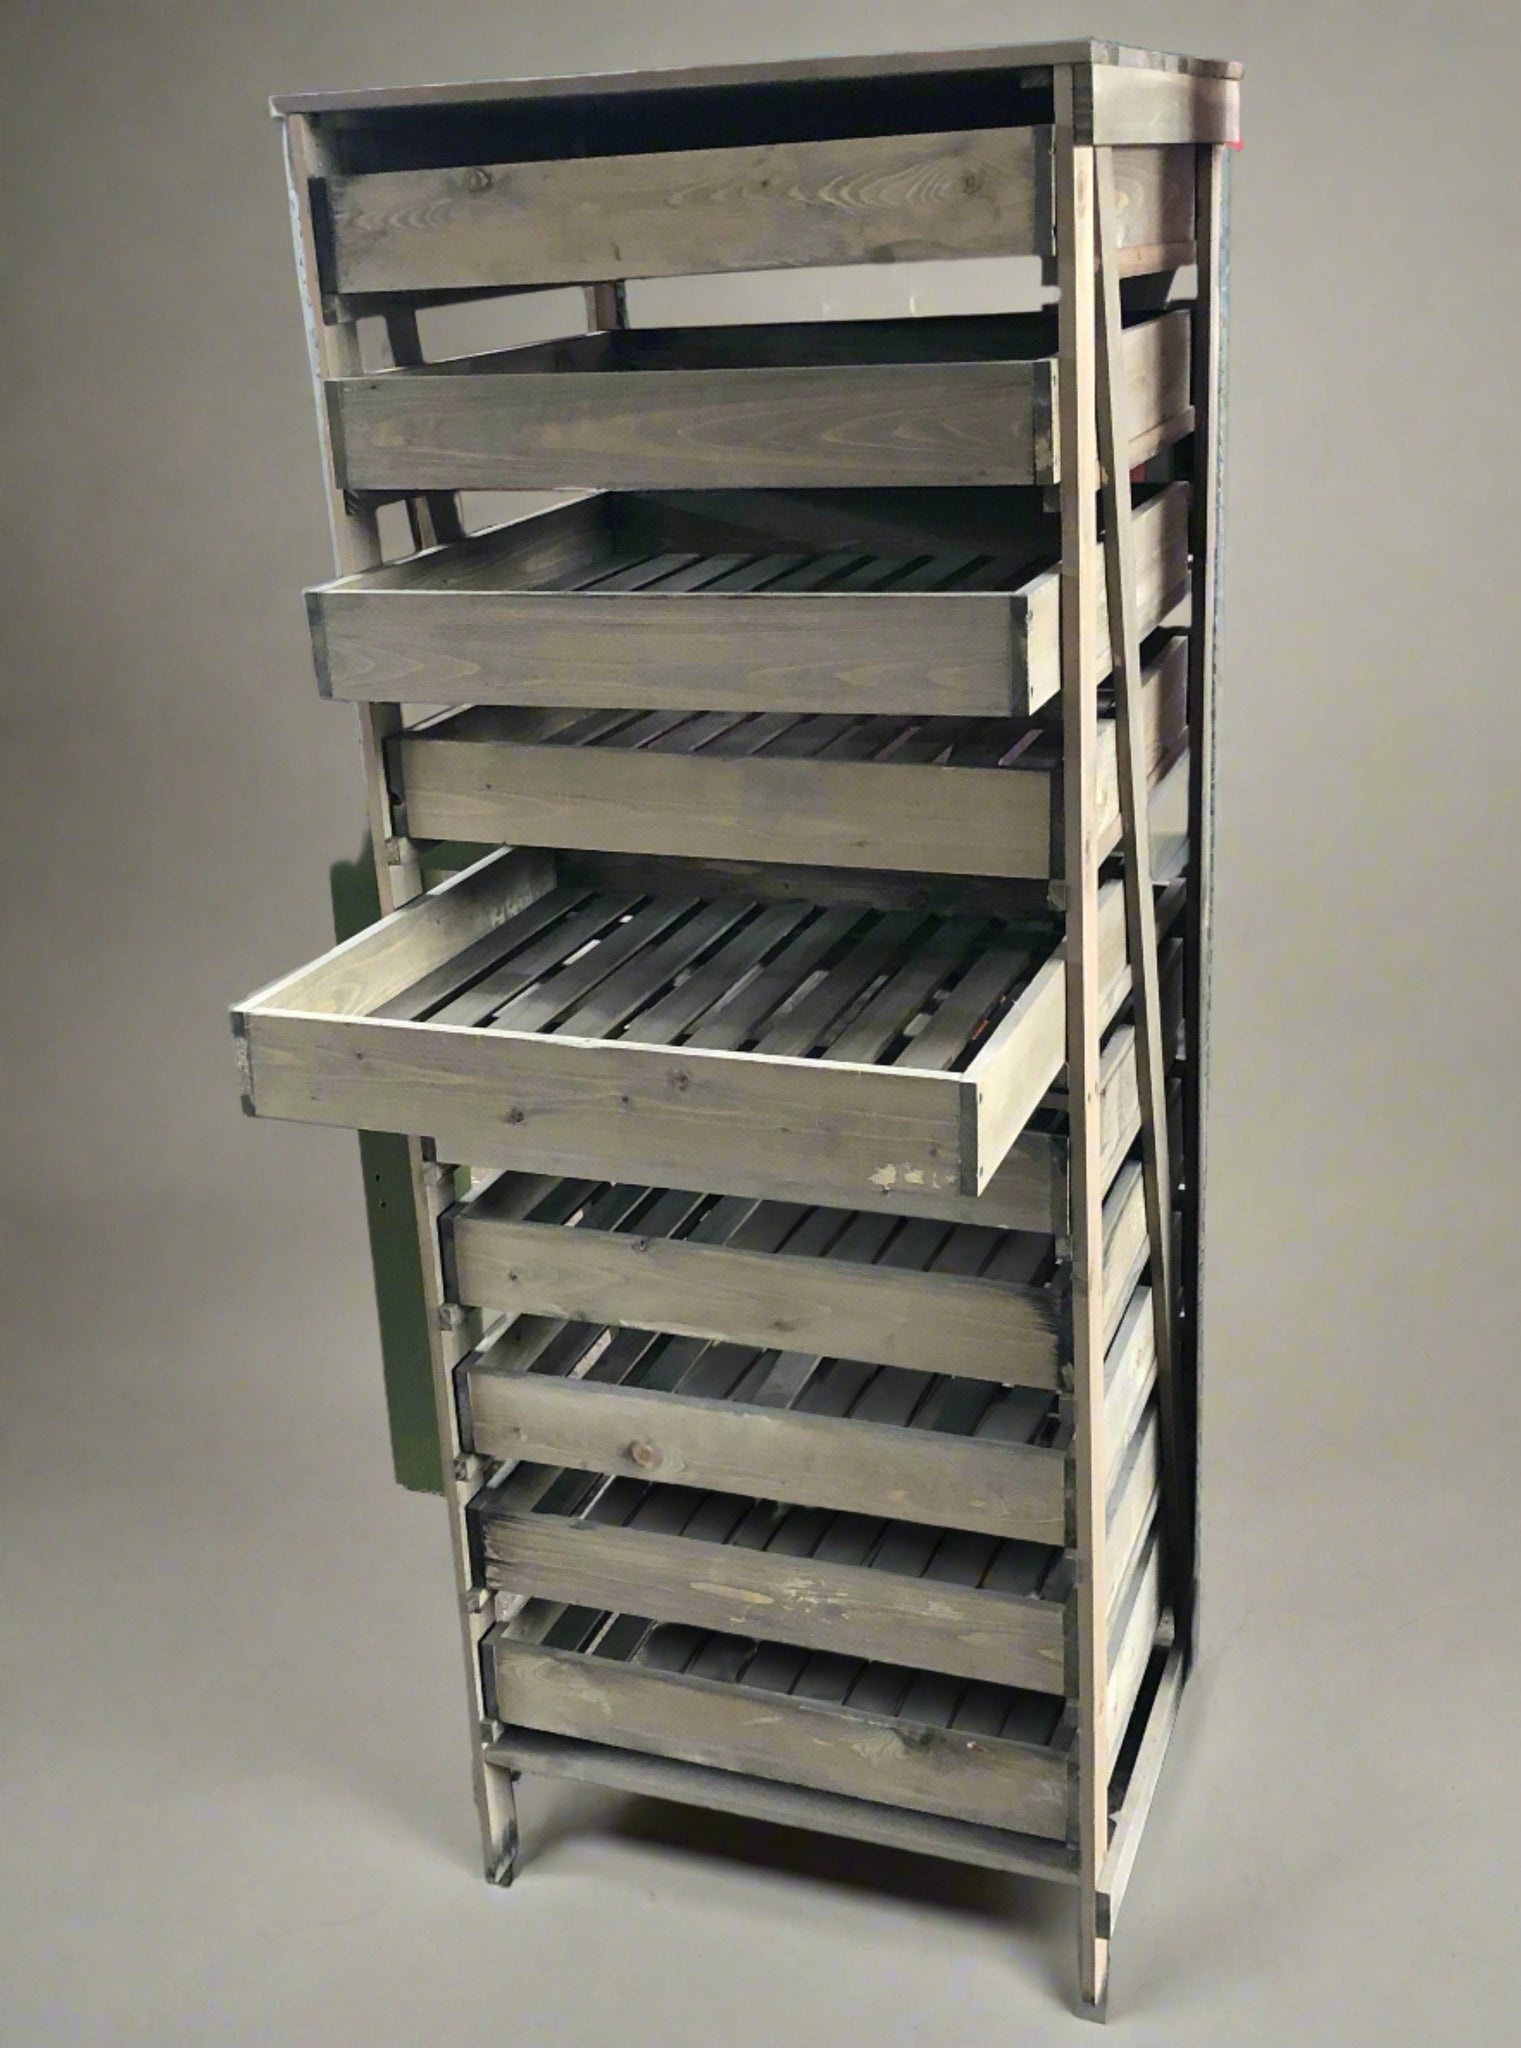 Baker's wooden bread rack with 10 drawers.